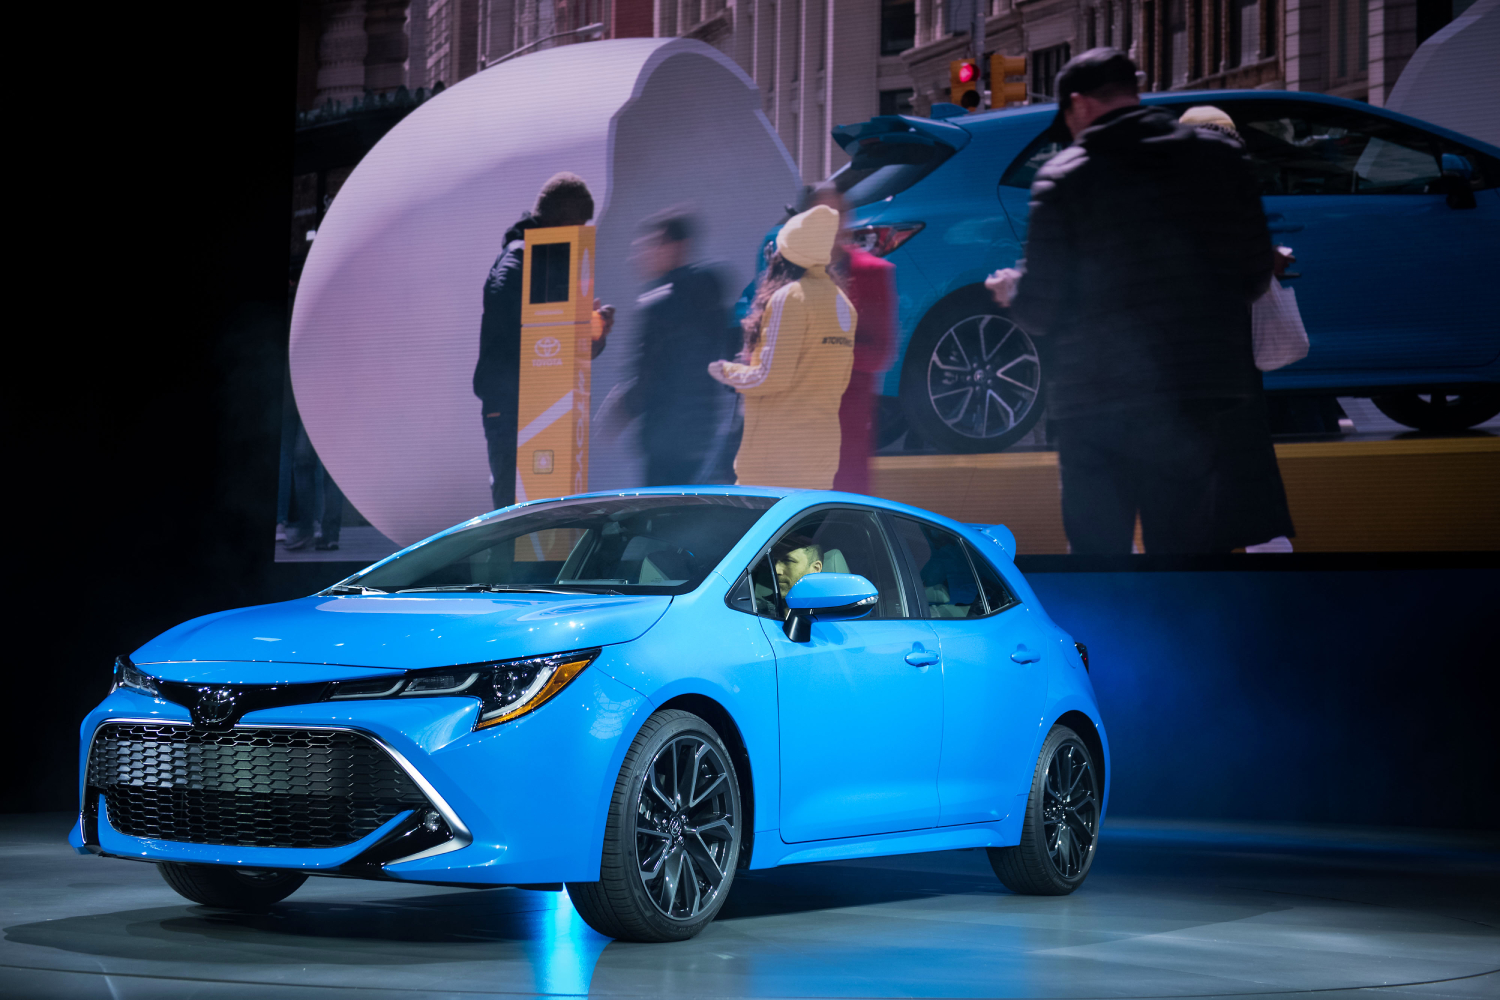 A blue Toyota Corolla XSE on display back when it was announced in 2019